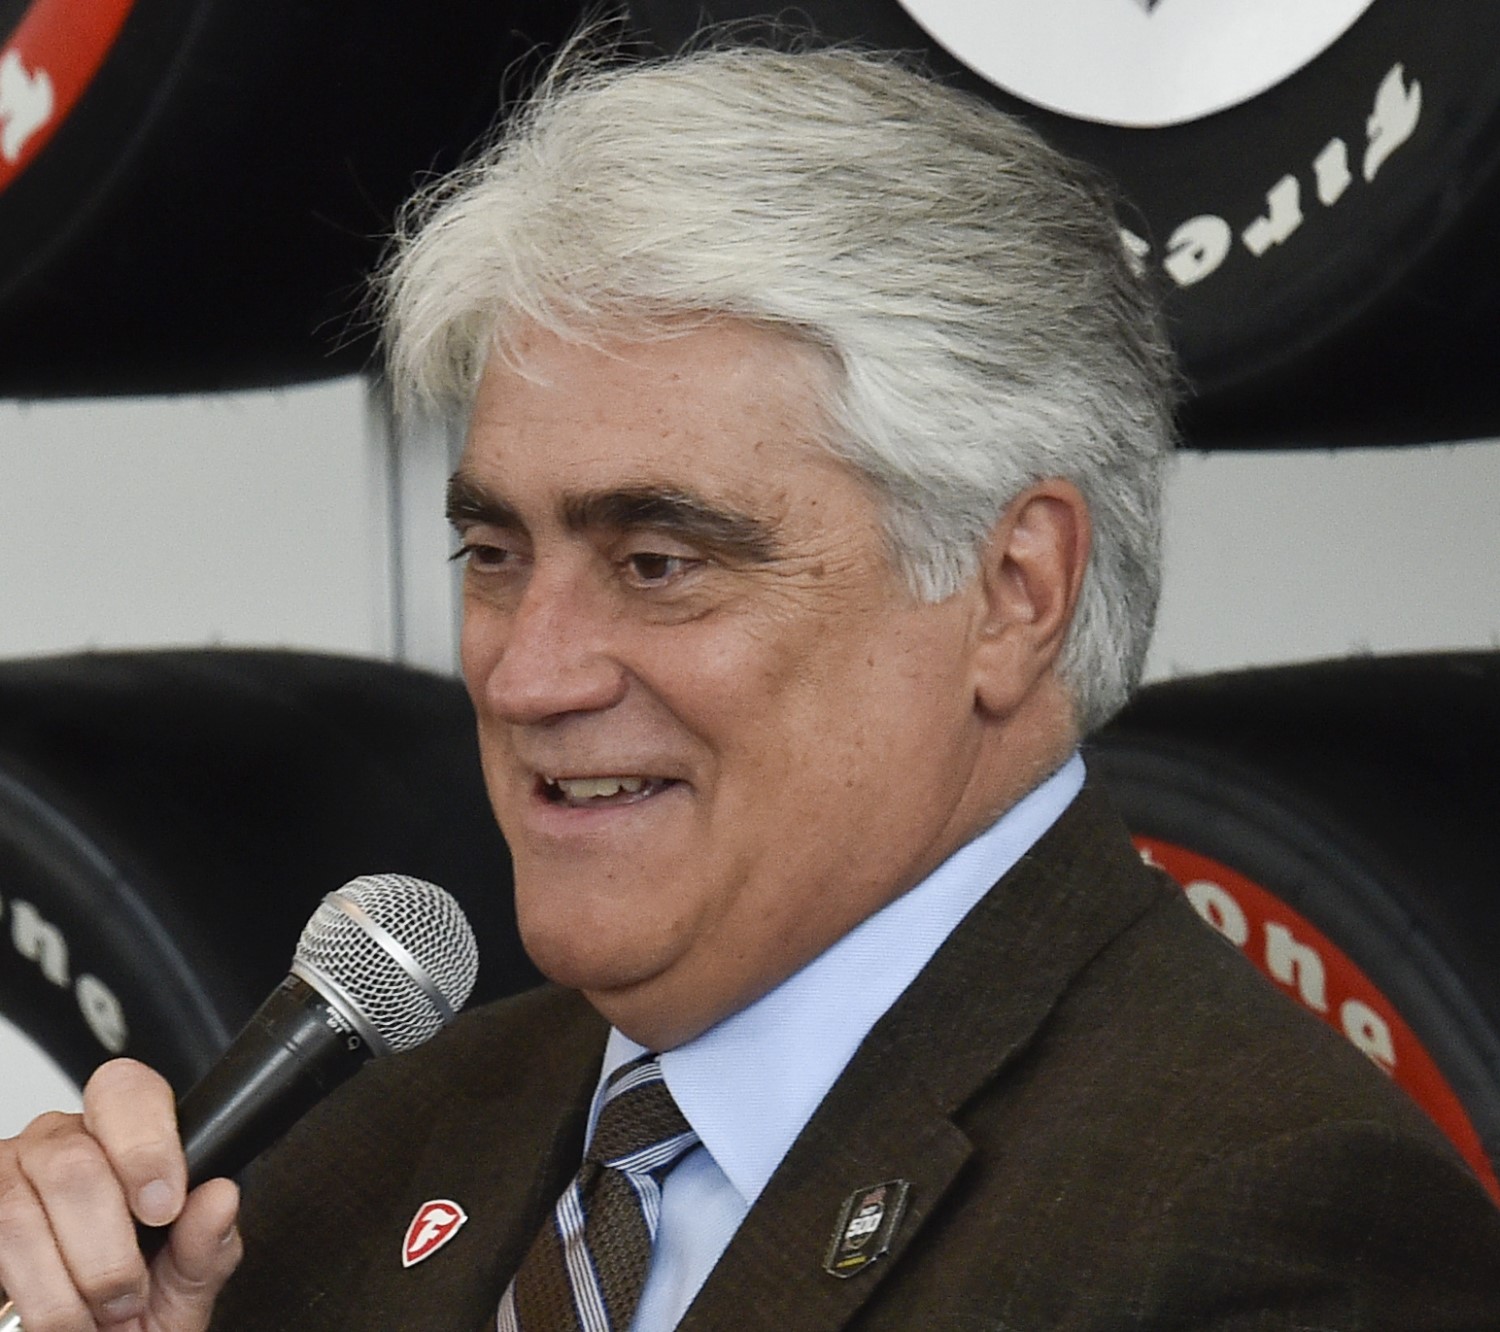 Mark Miles said IndyCar was not for sale, but AR1.com maintained it was.